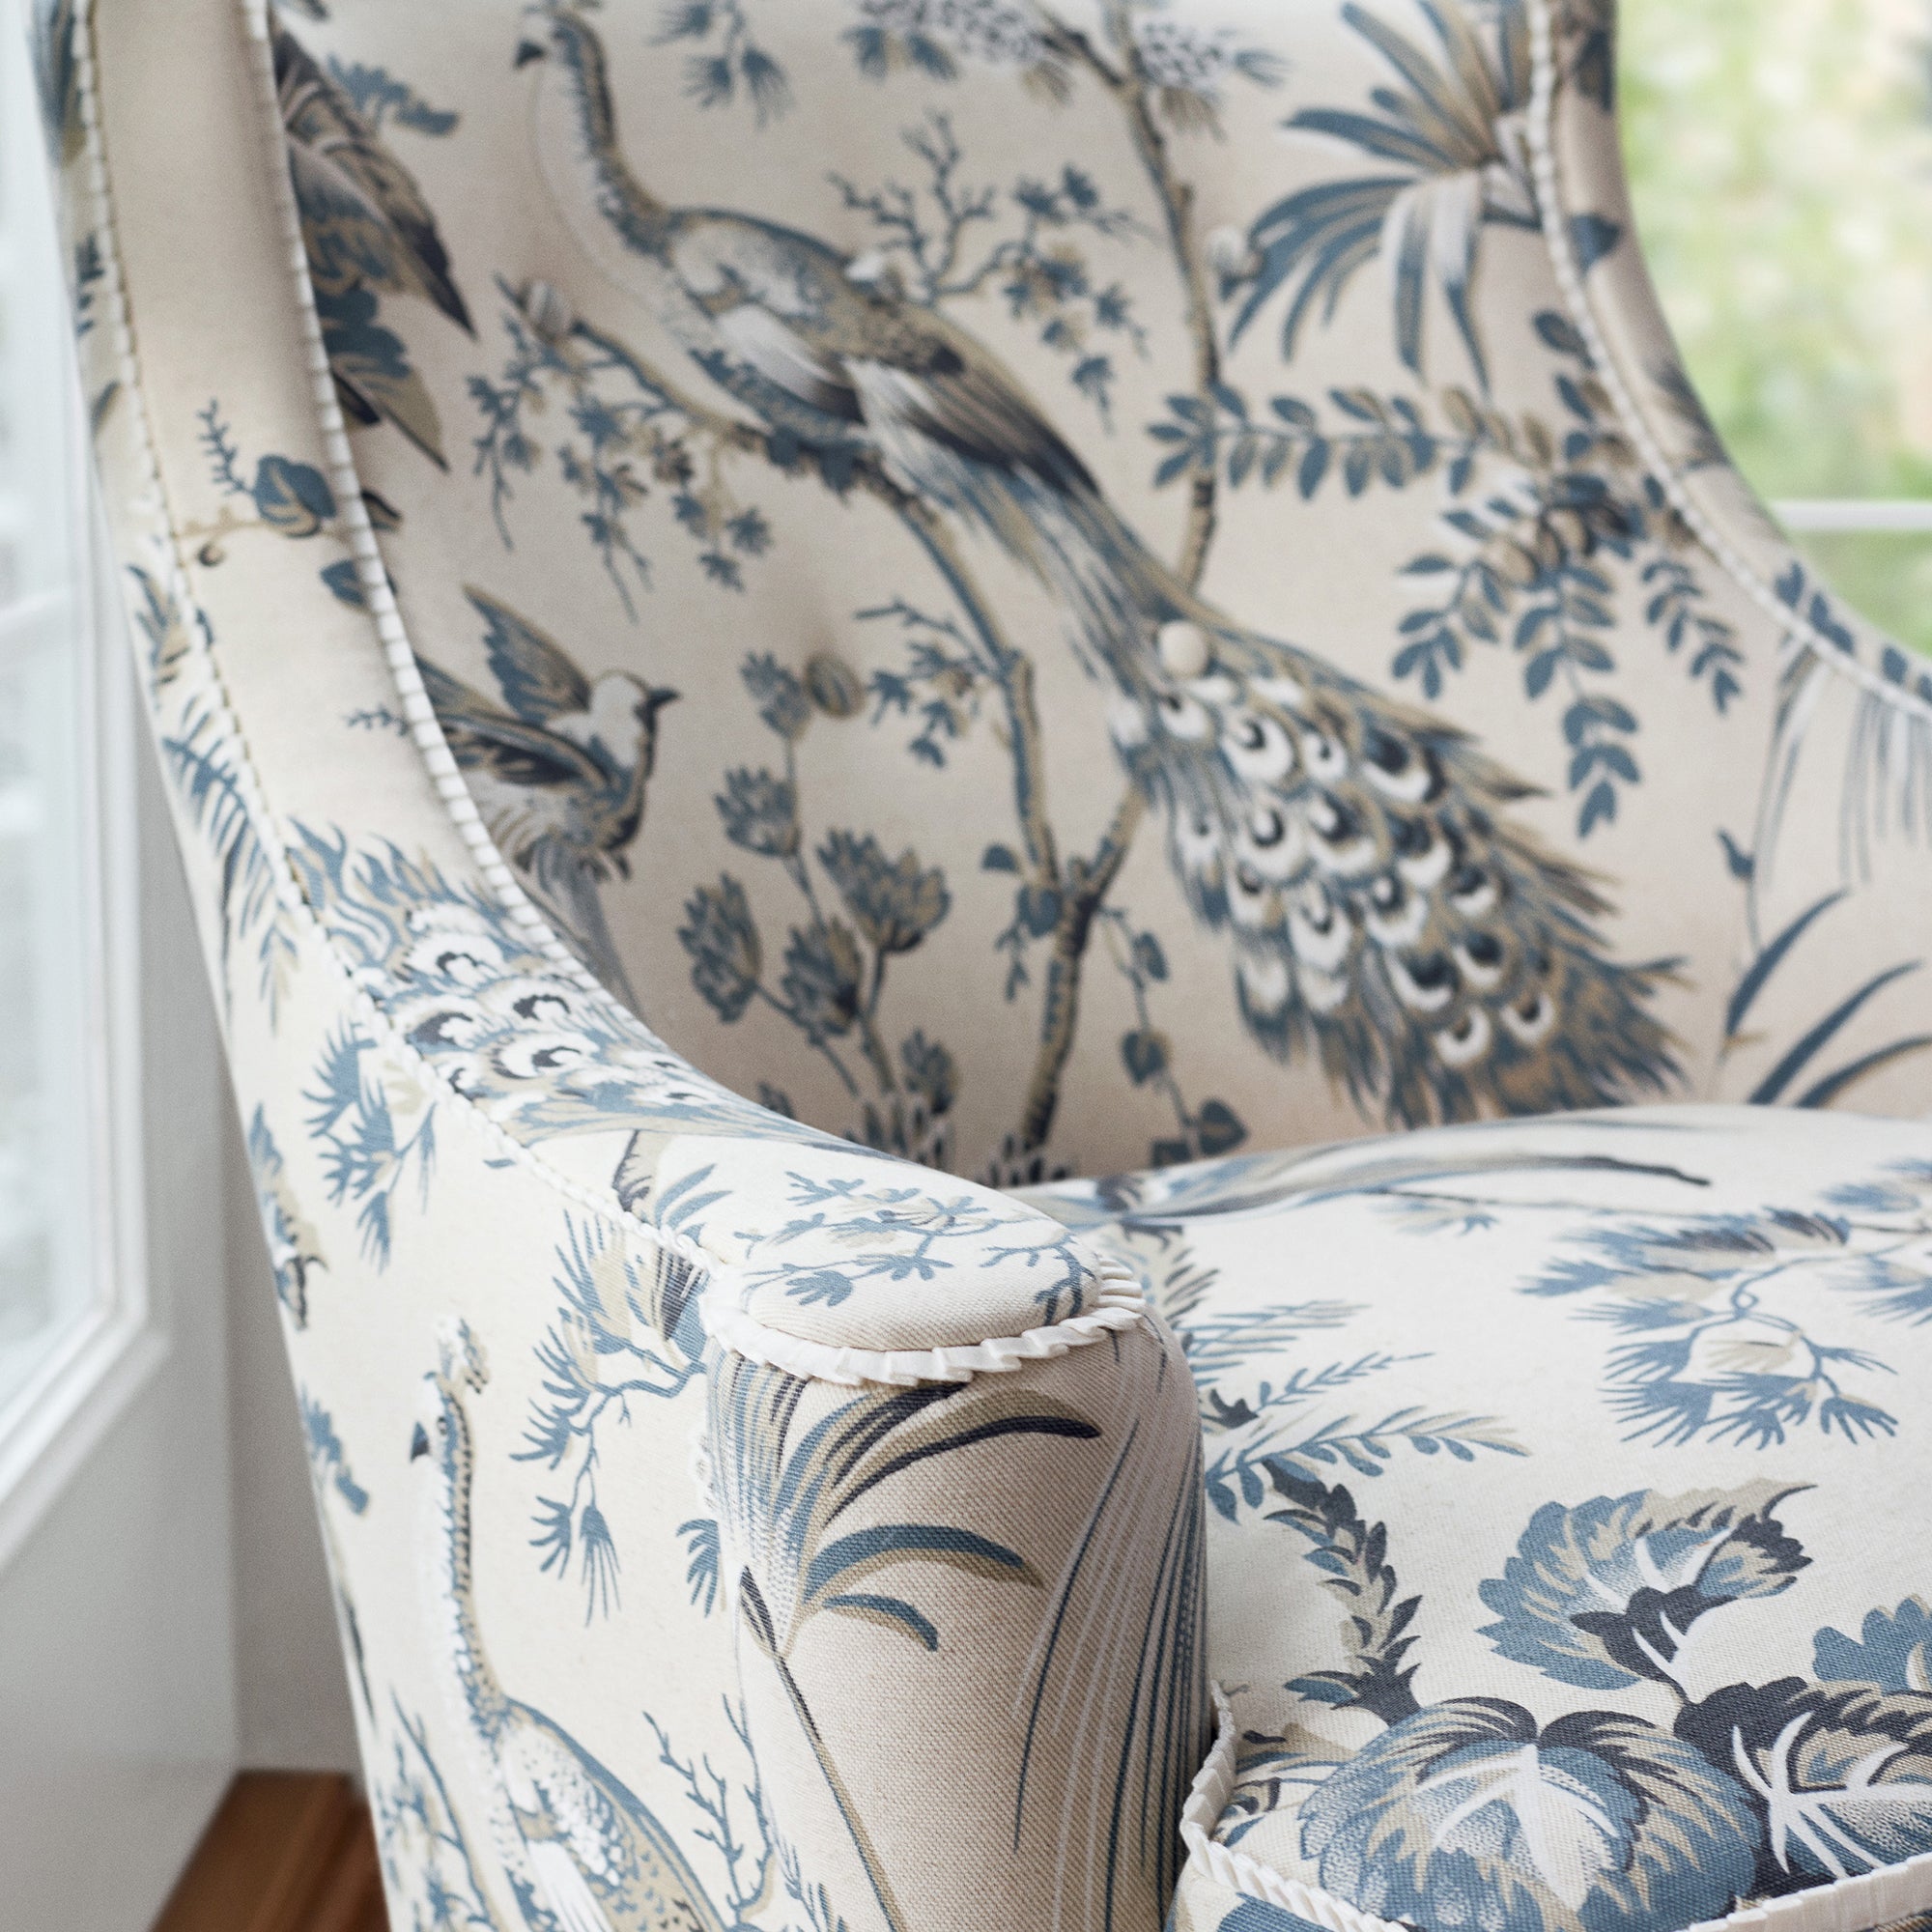 Detailed Peacock Toile printed fabric in slate and black color, pattern number AF57833 of the Anna French Bristol collection